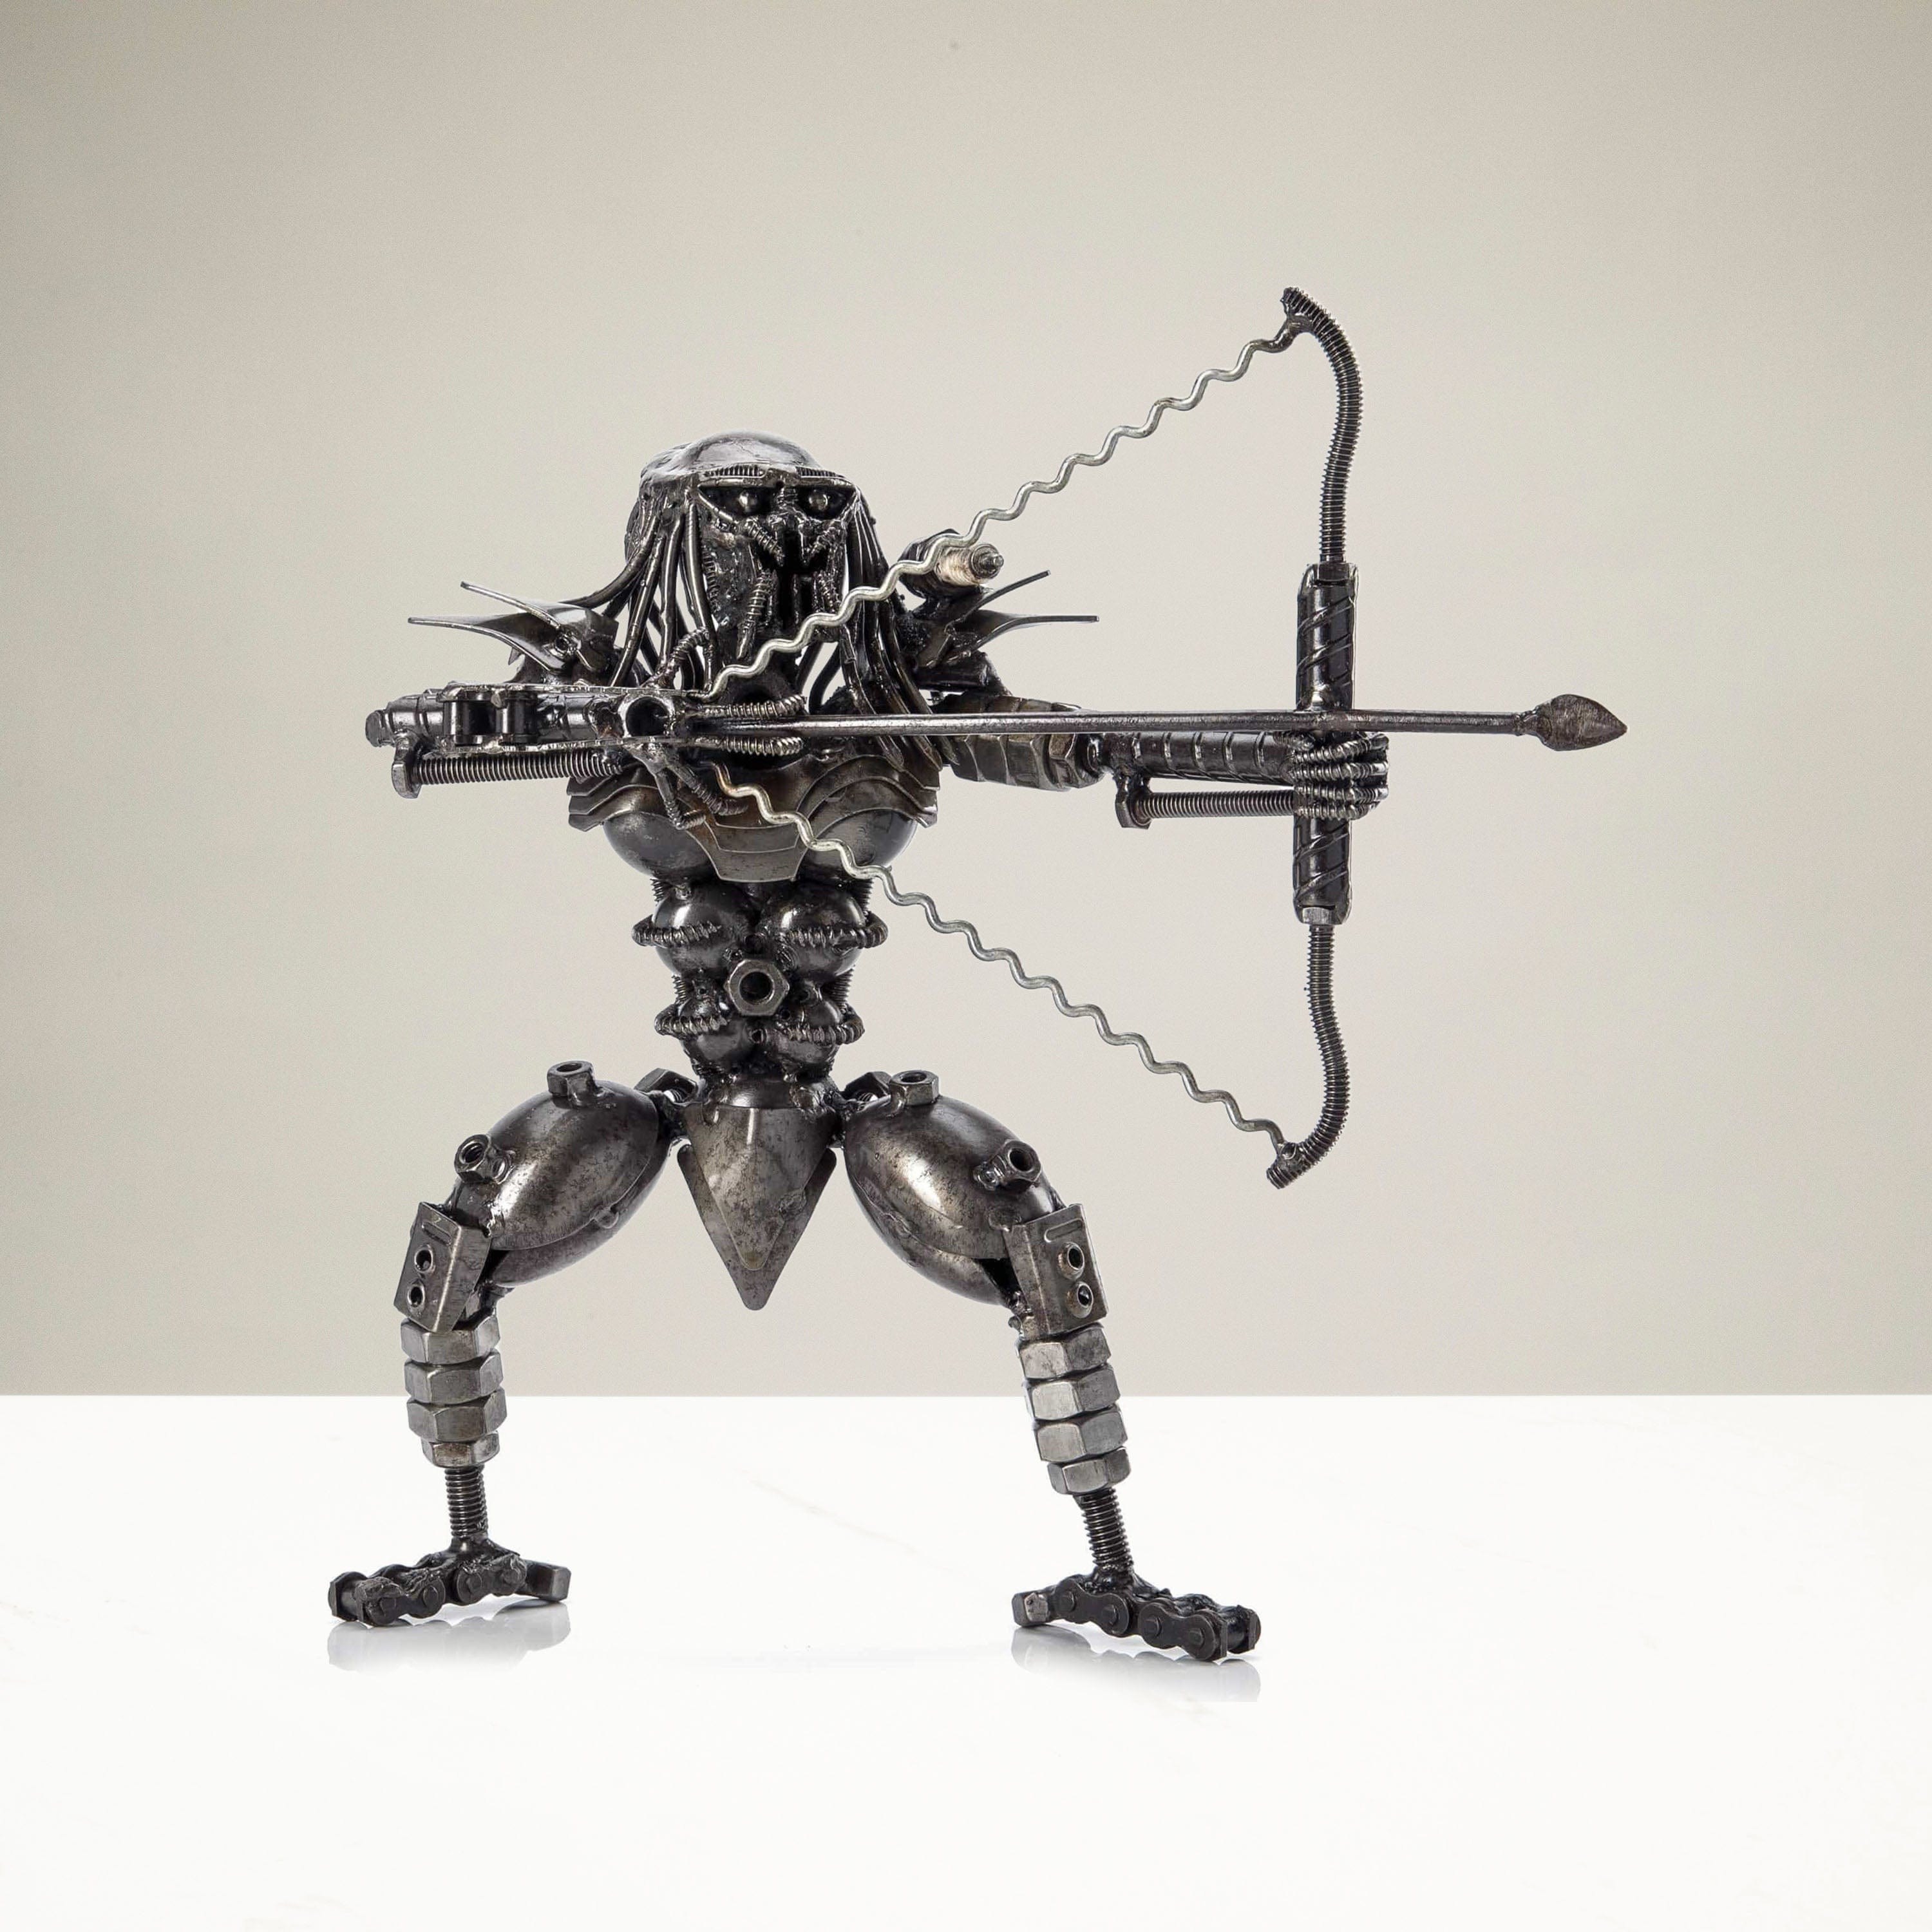 KALIFANO Recycled Metal Art Predator with Bow and Arrow Inspired Recycled Metal Sculpture RMS-700PA-N